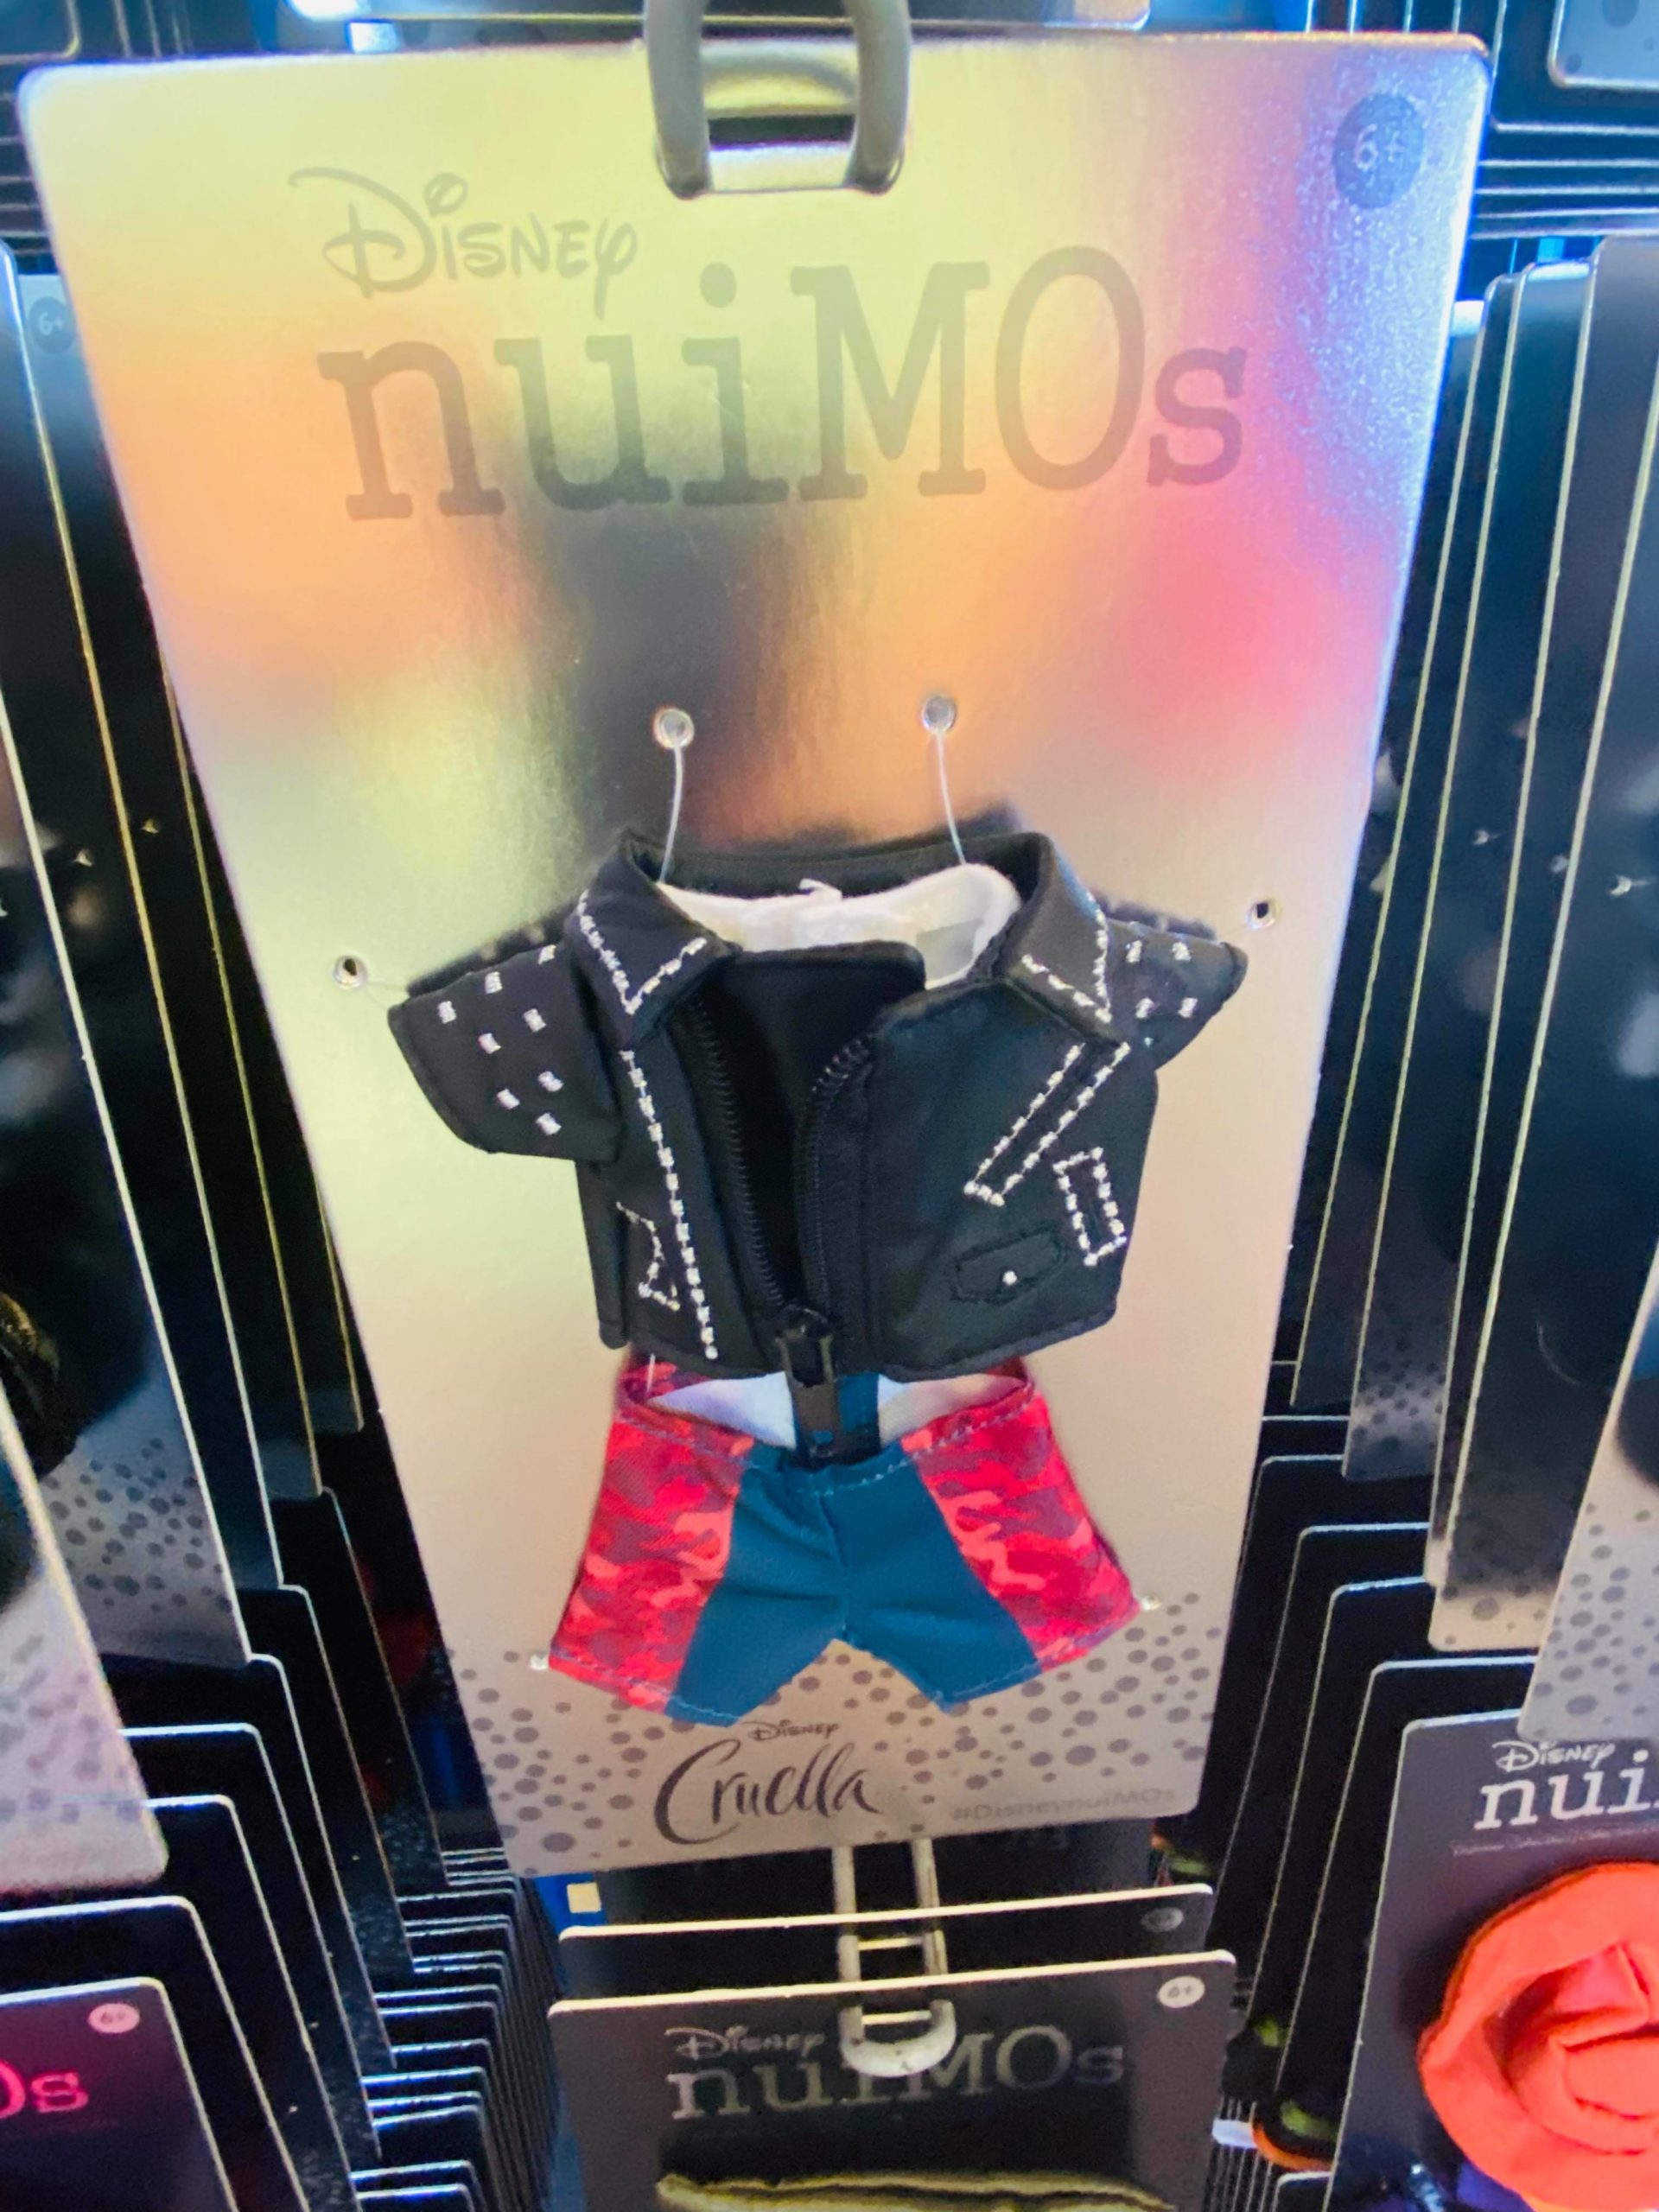 Cruella nuiMOs outfits at Mouse Gear